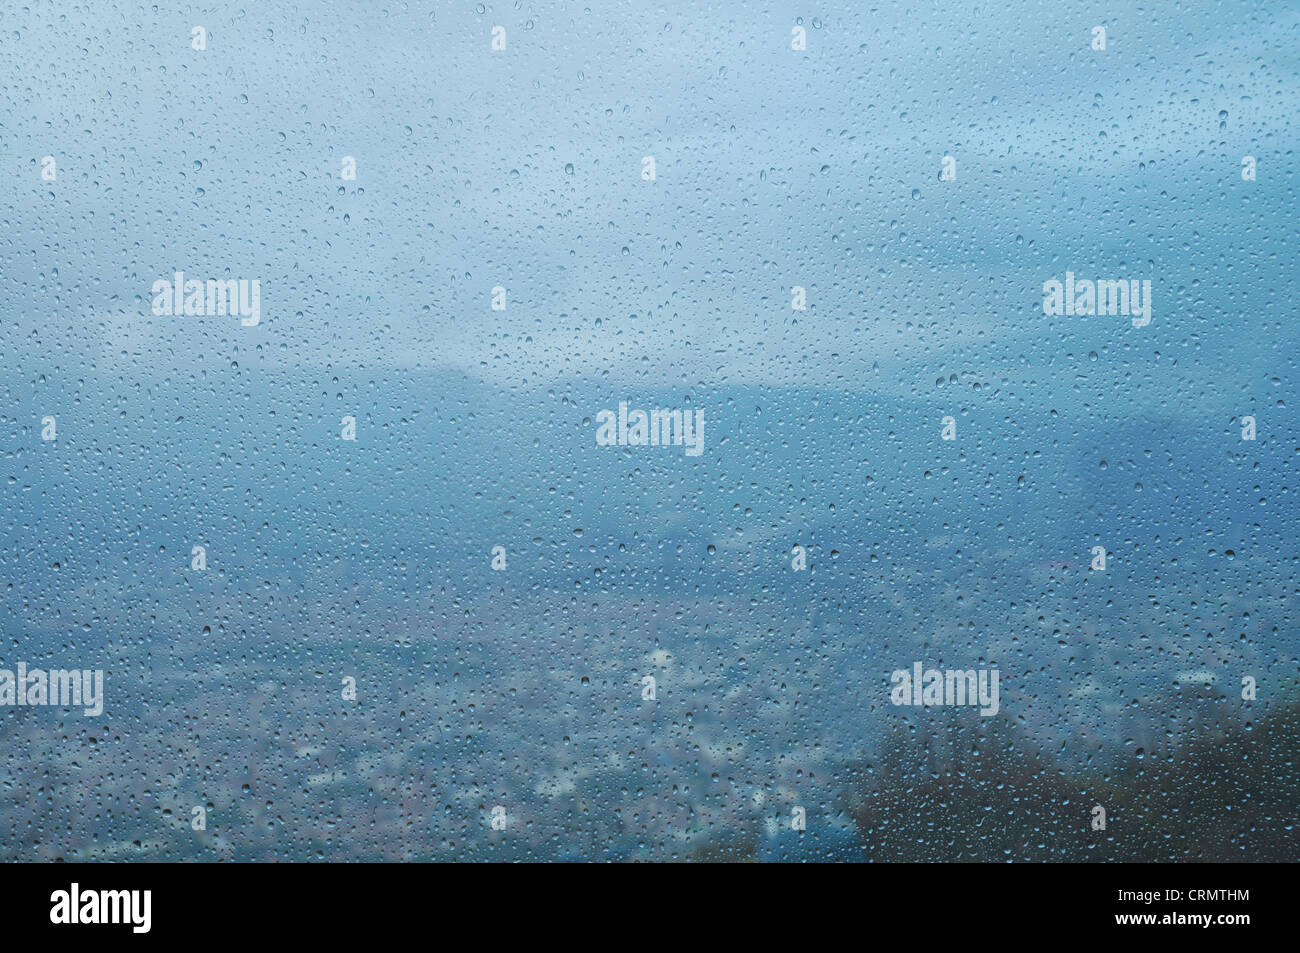 Raindrops on the window. City in the background. Stock Photo